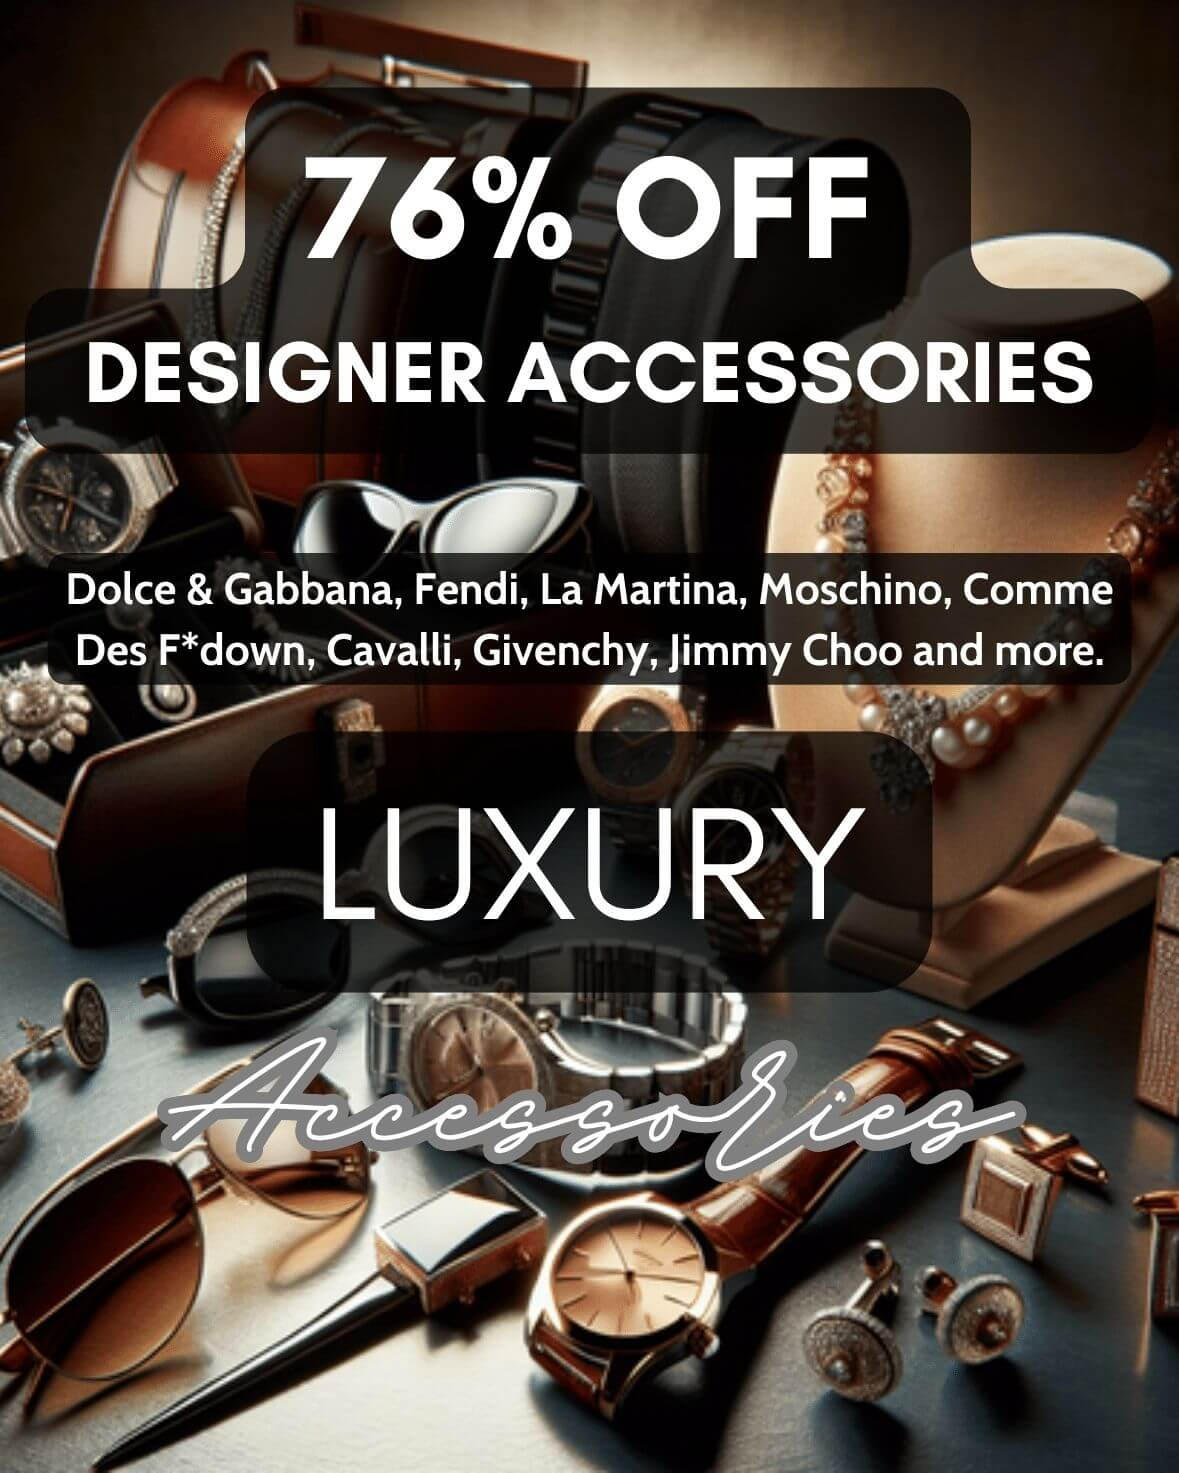 authentic designer accessories from authorized dealers worldwide